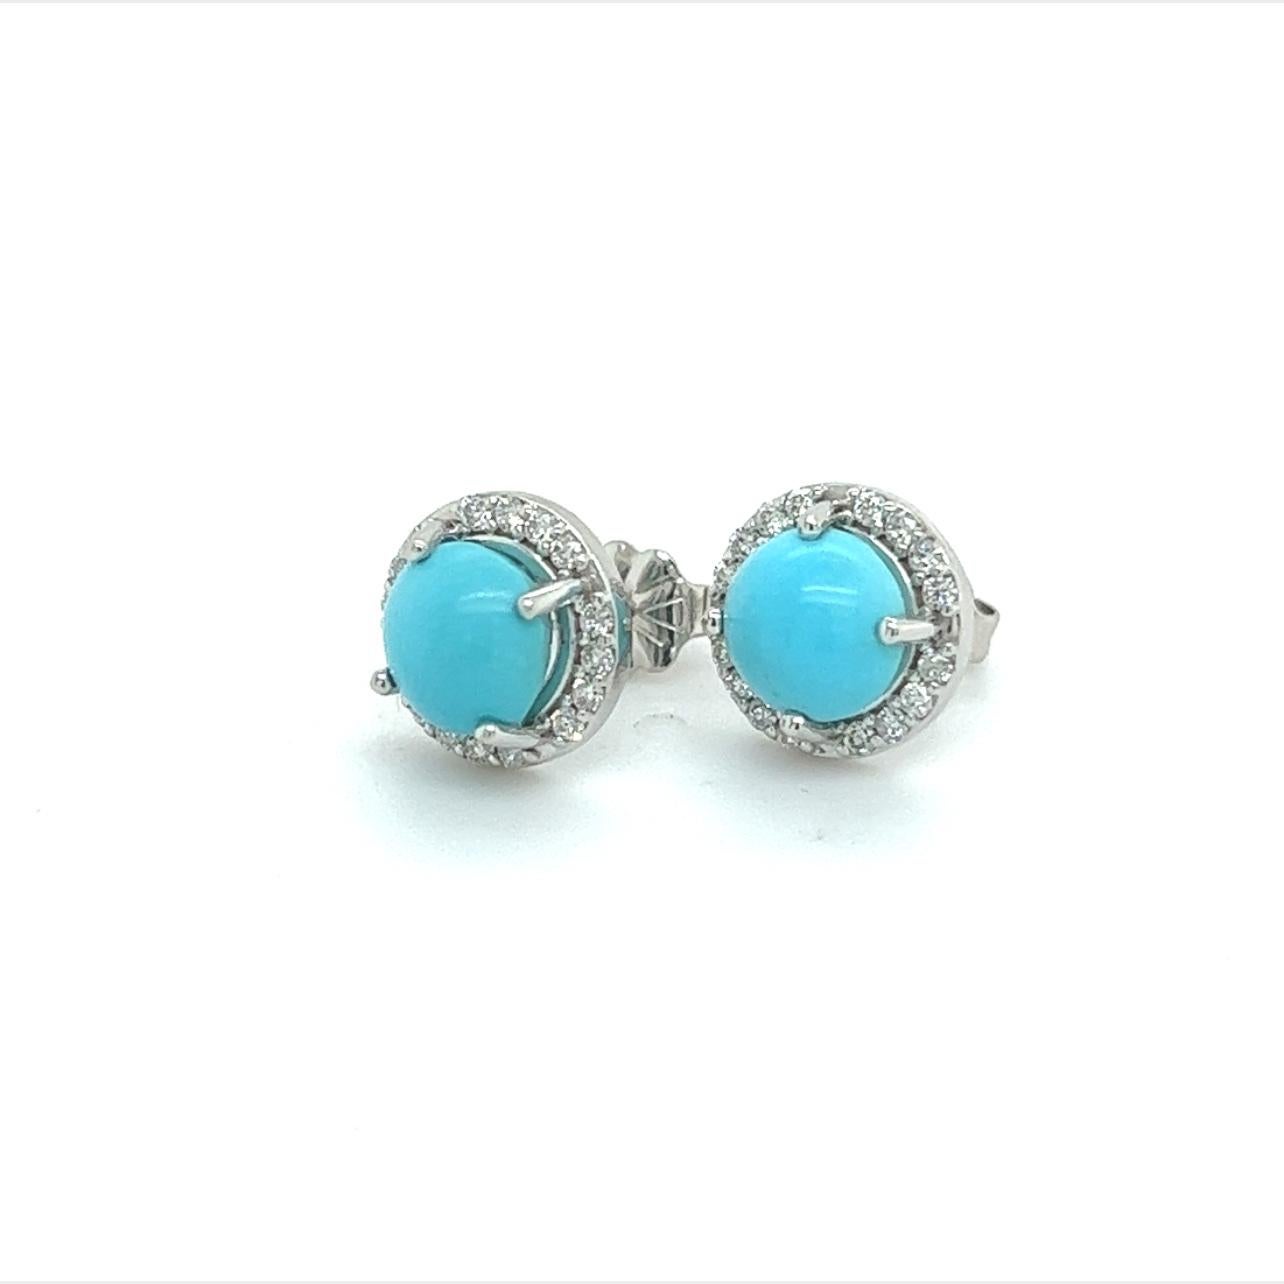 Natural Turquoise Diamond Stud Earrings 14k White Gold 2.95 TCW Certified $2,490 217835

This is a Unique Custom Made Glamorous Piece of Jewelry!

Nothing says, “I Love you” more than Diamonds and Pearls!

These Sapphire earrings have been